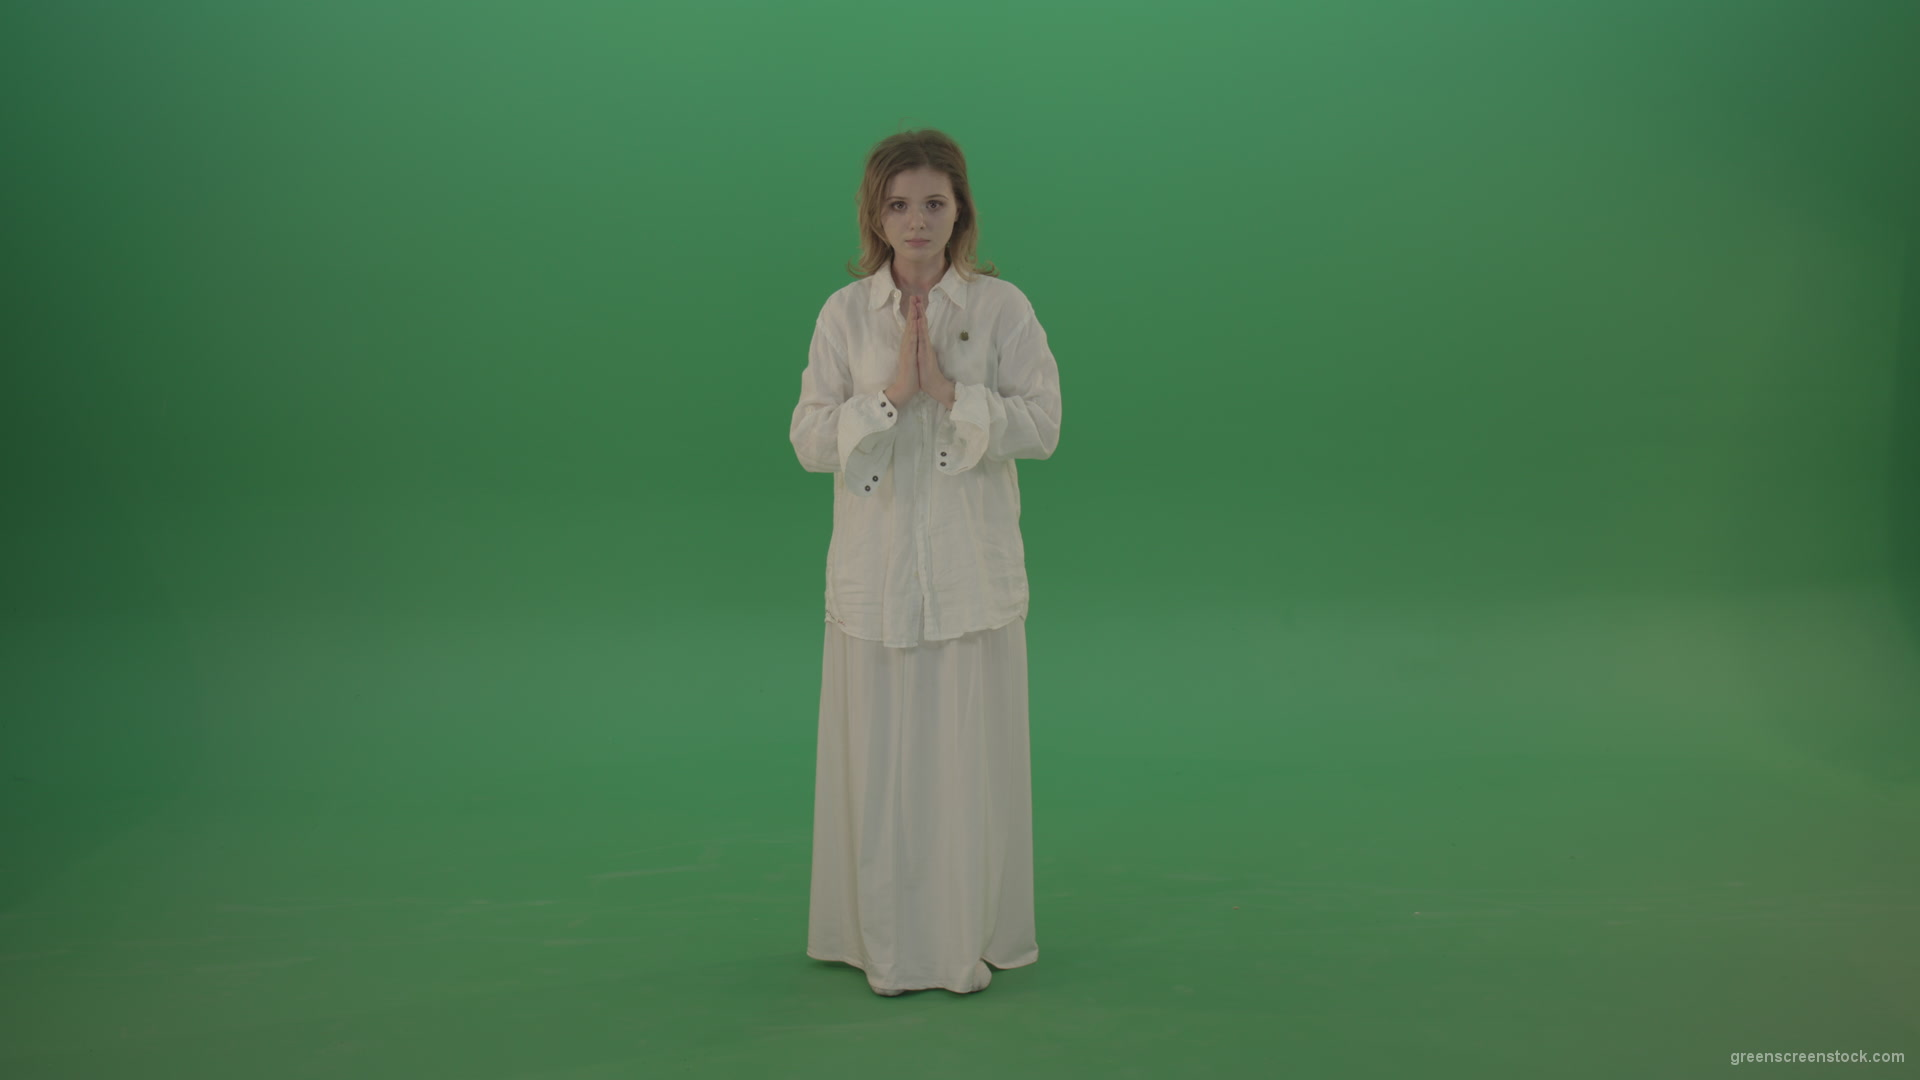 Girl-wearing-a-white-suit-pray-to-god-isolated-on-green-background_009 Green Screen Stock